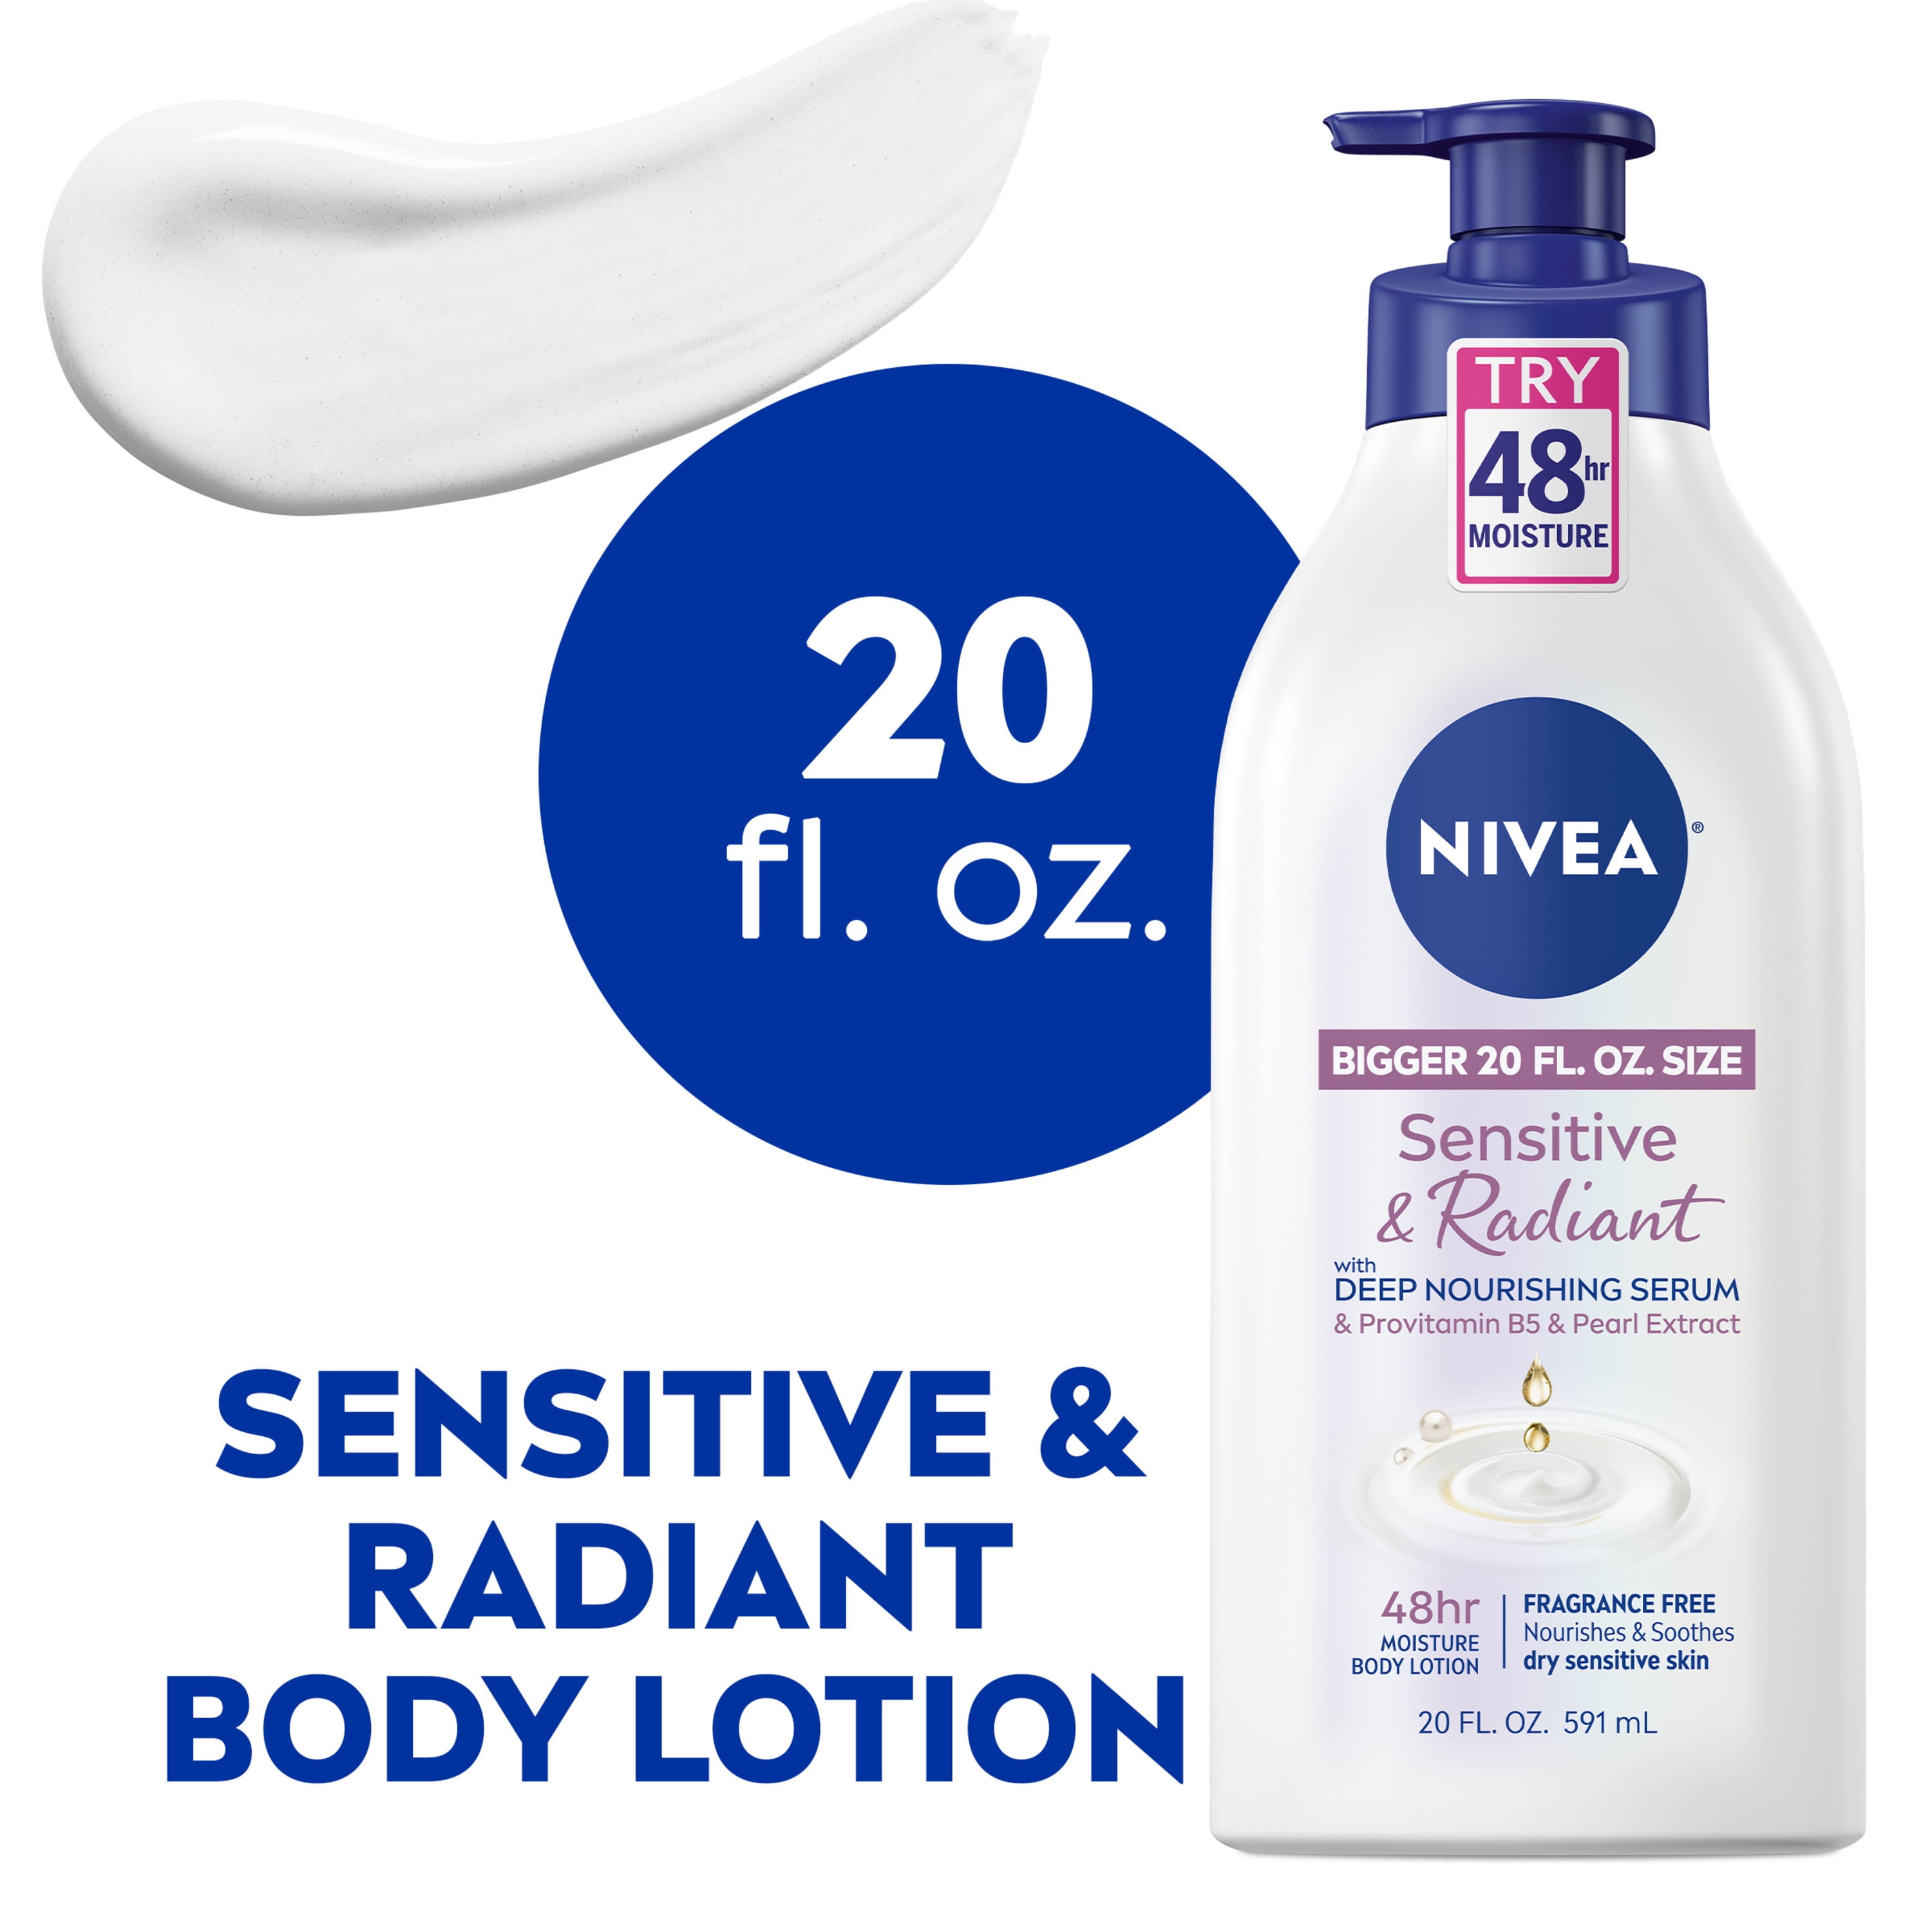 NIVEA Sensitive and Radiant Body Lotion for Dry Skin, Unscented